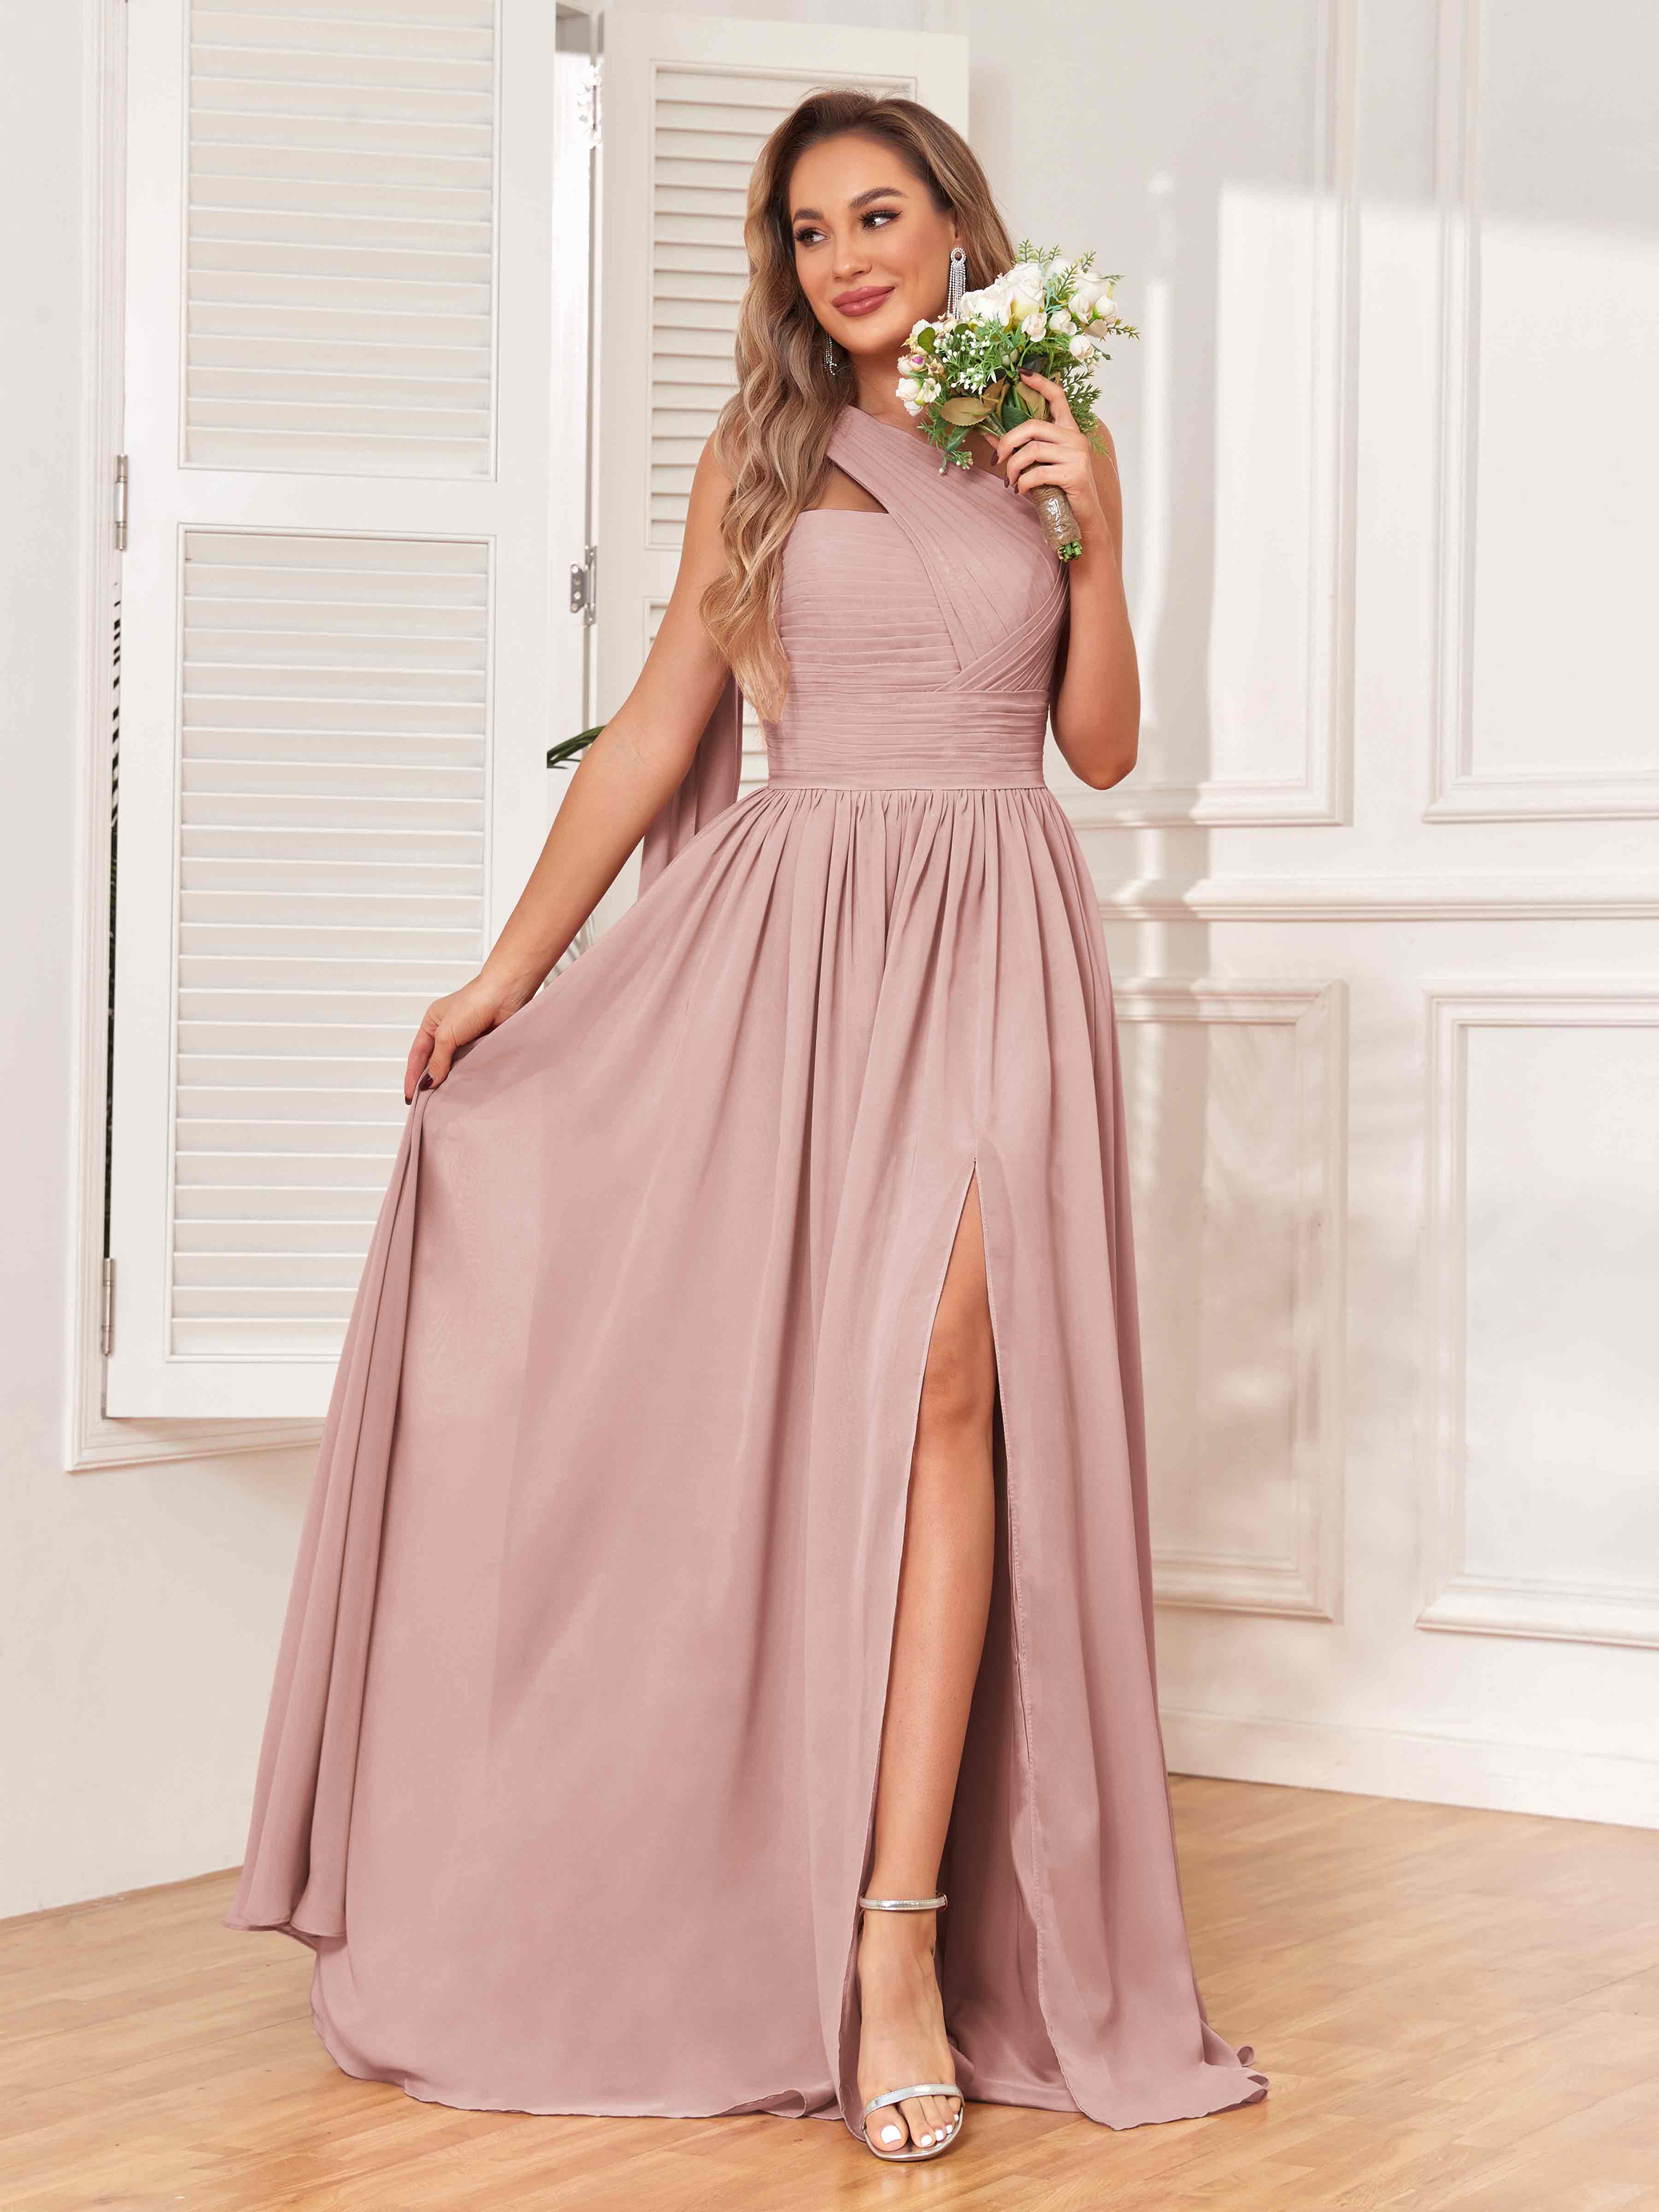 Browse Elegant Dusty Rose Bridesmaid Dresses, Fast Delivery Worldwide